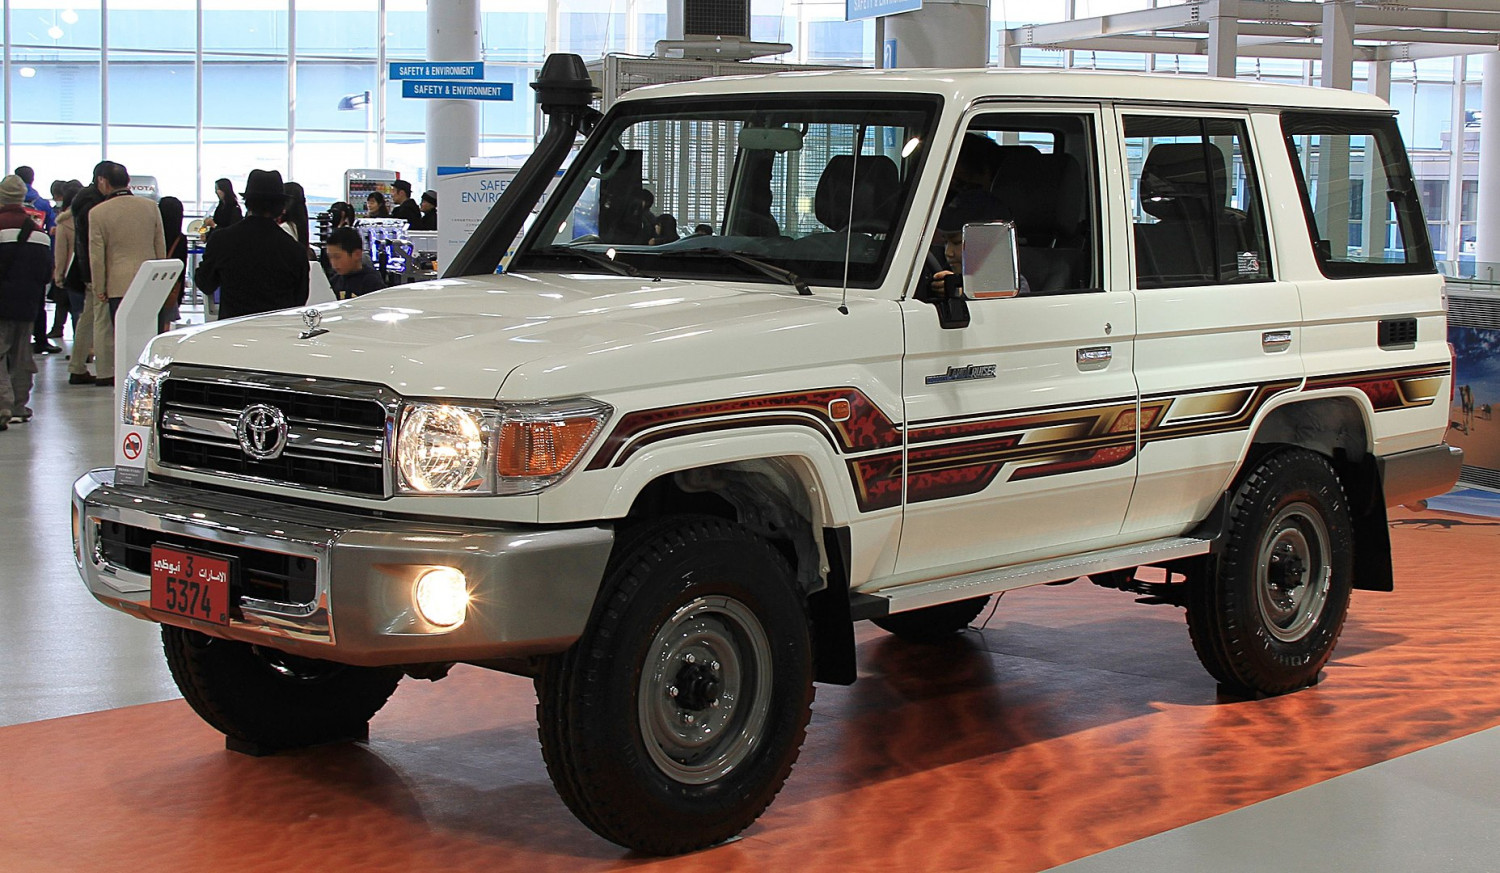 Example of a Land Cruiser 79 series